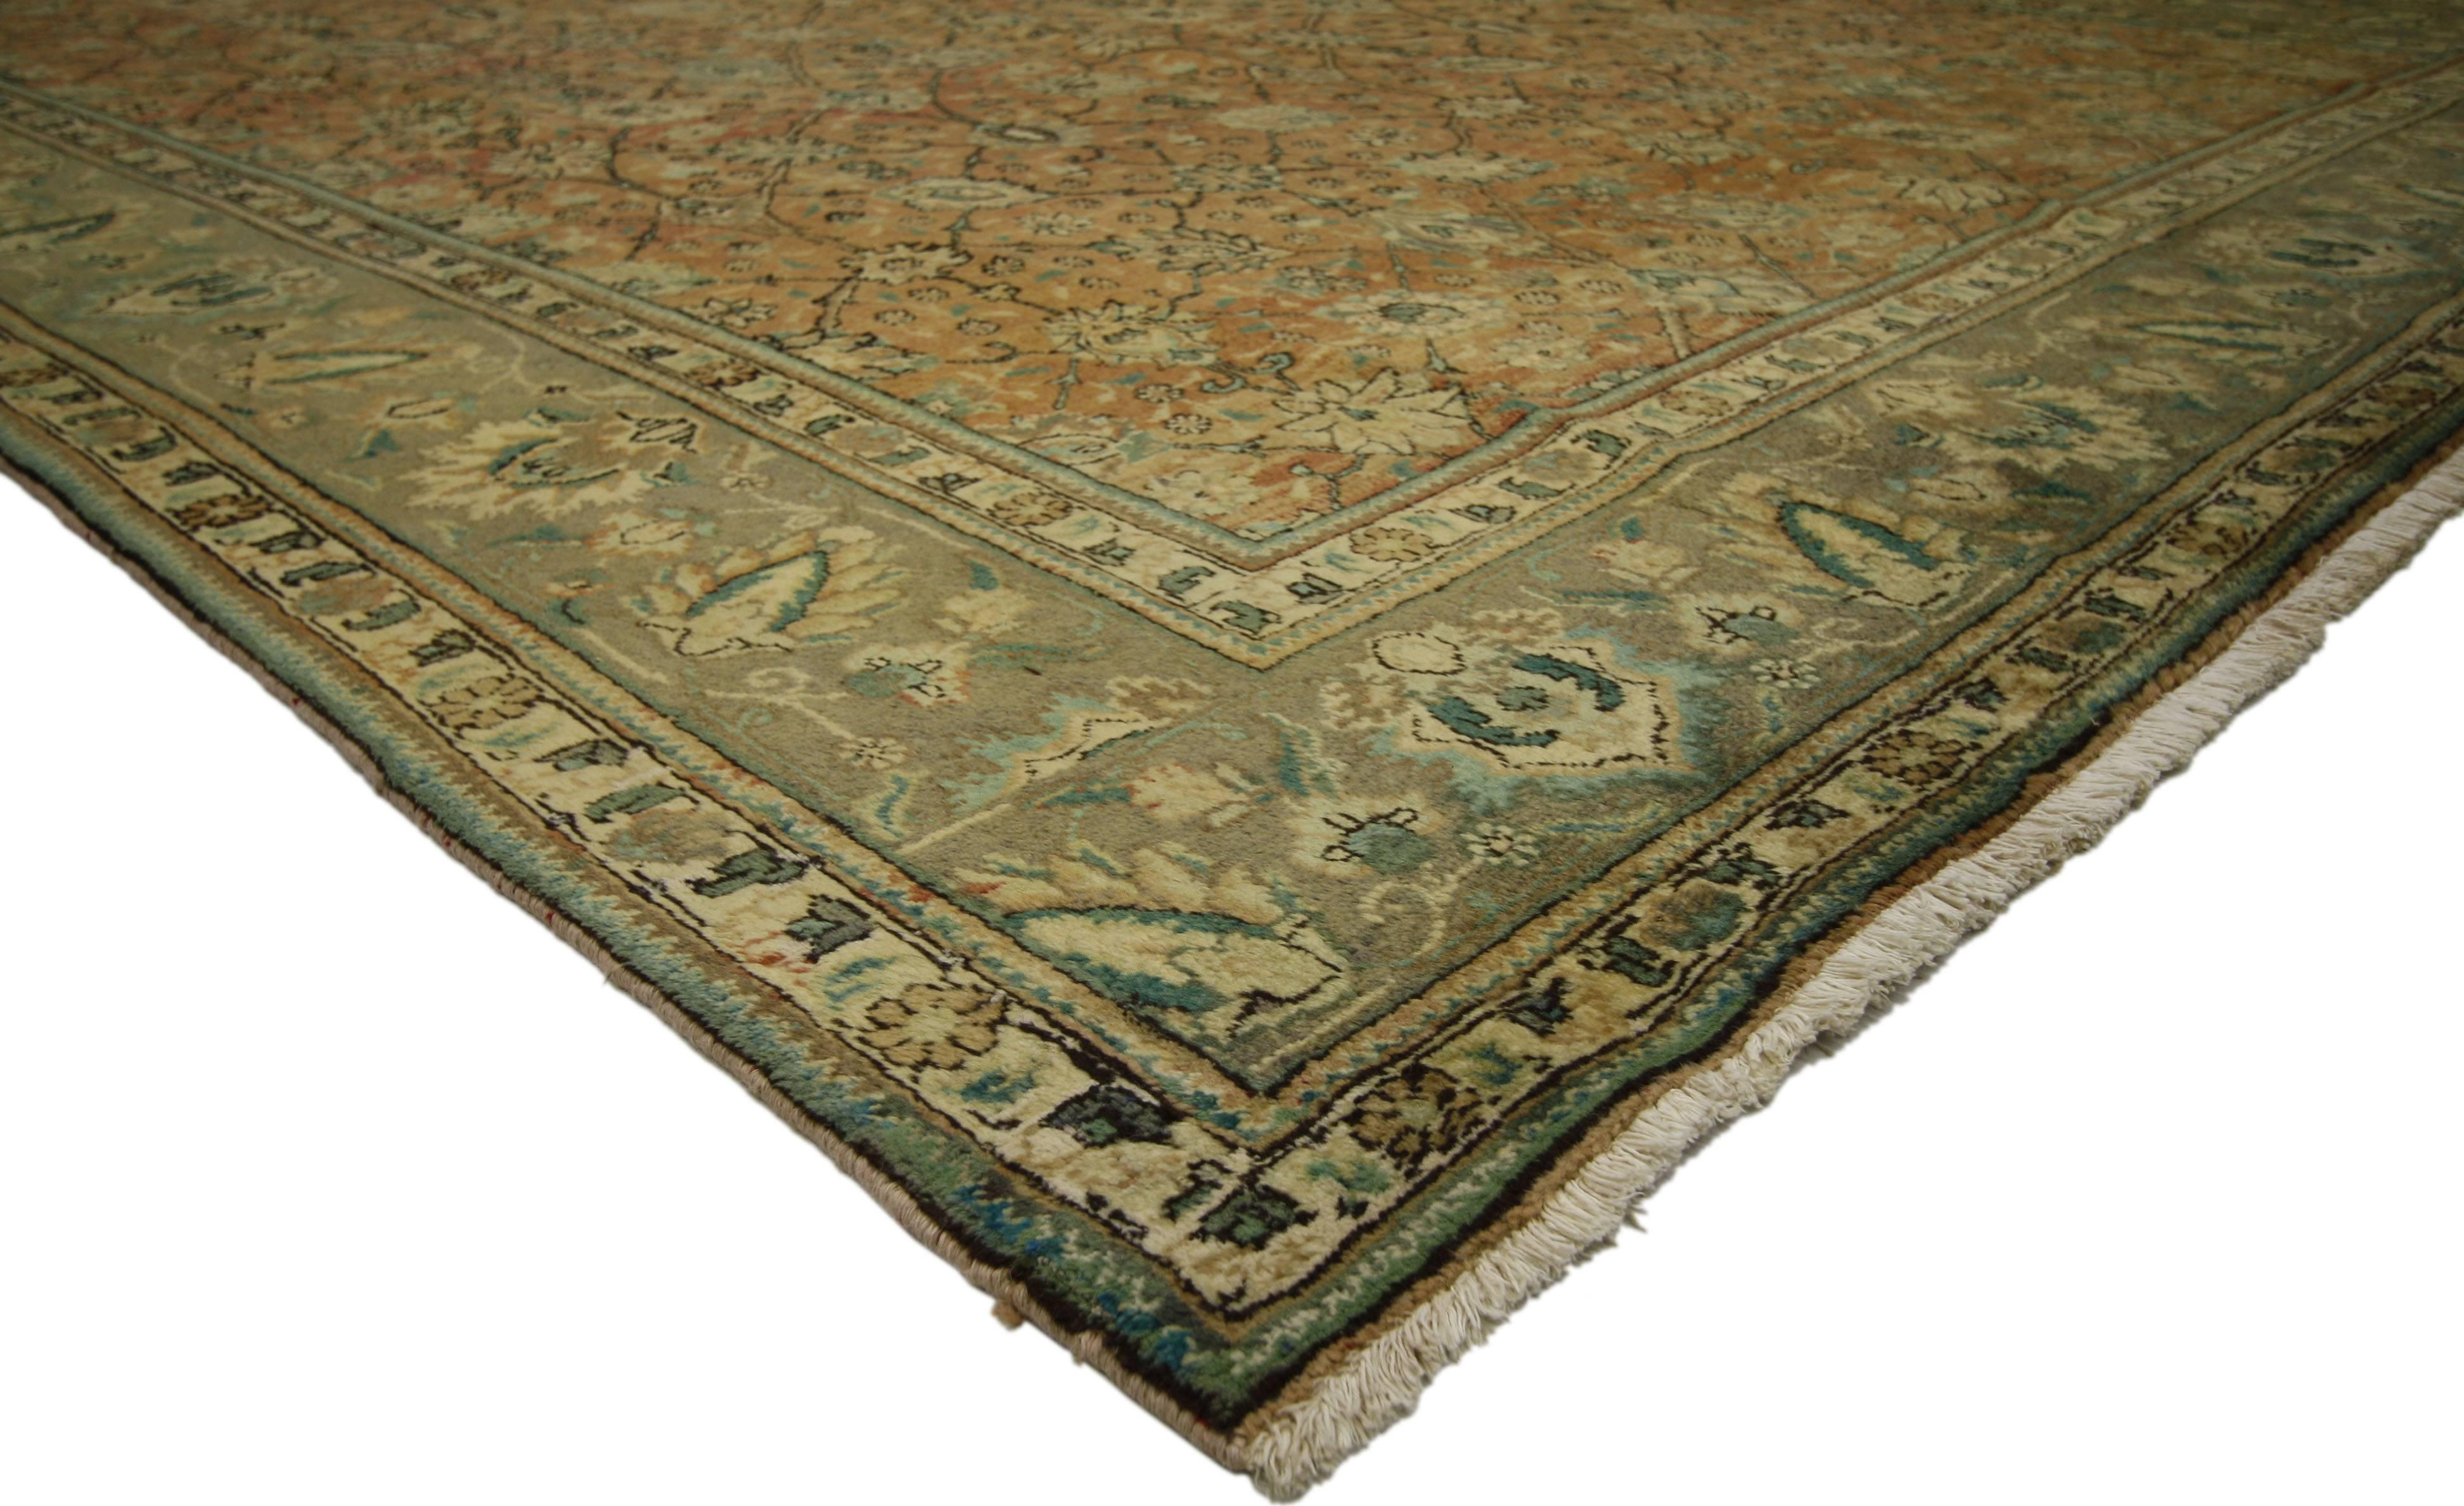 76329, vintage Persian Tabriz rug with traditional style. This hand-knotted wool vintage Persian Tabriz rug features an allover pattern surrounded by a classic border creating a well-balanced and timeless design. This vintage Persian Tabriz rug